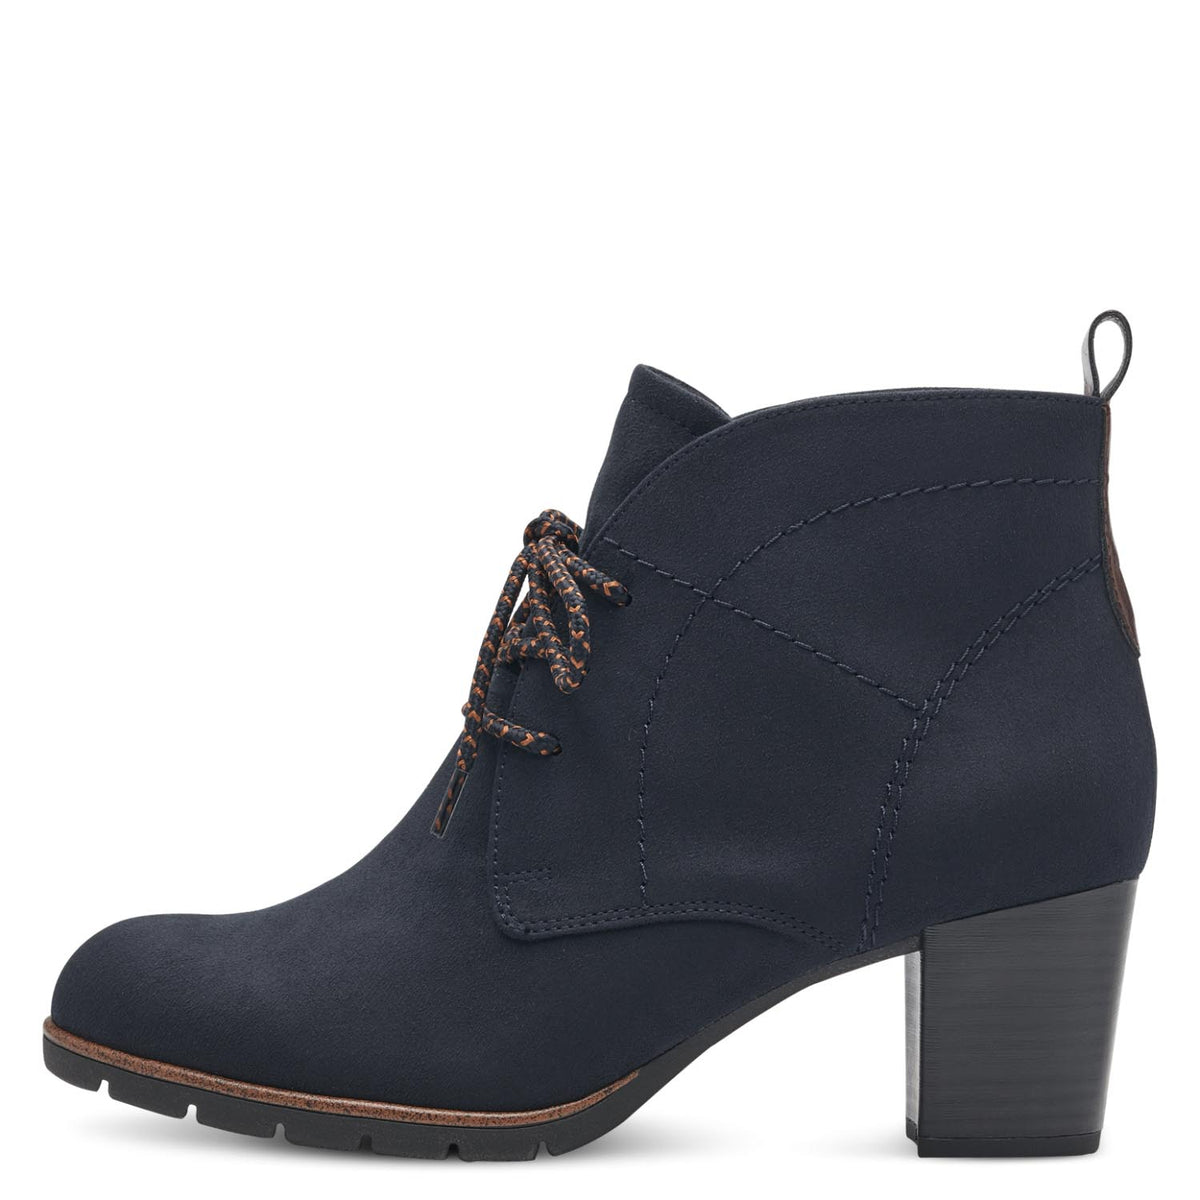 Front view of Marco Tozzi navy ankle boot.